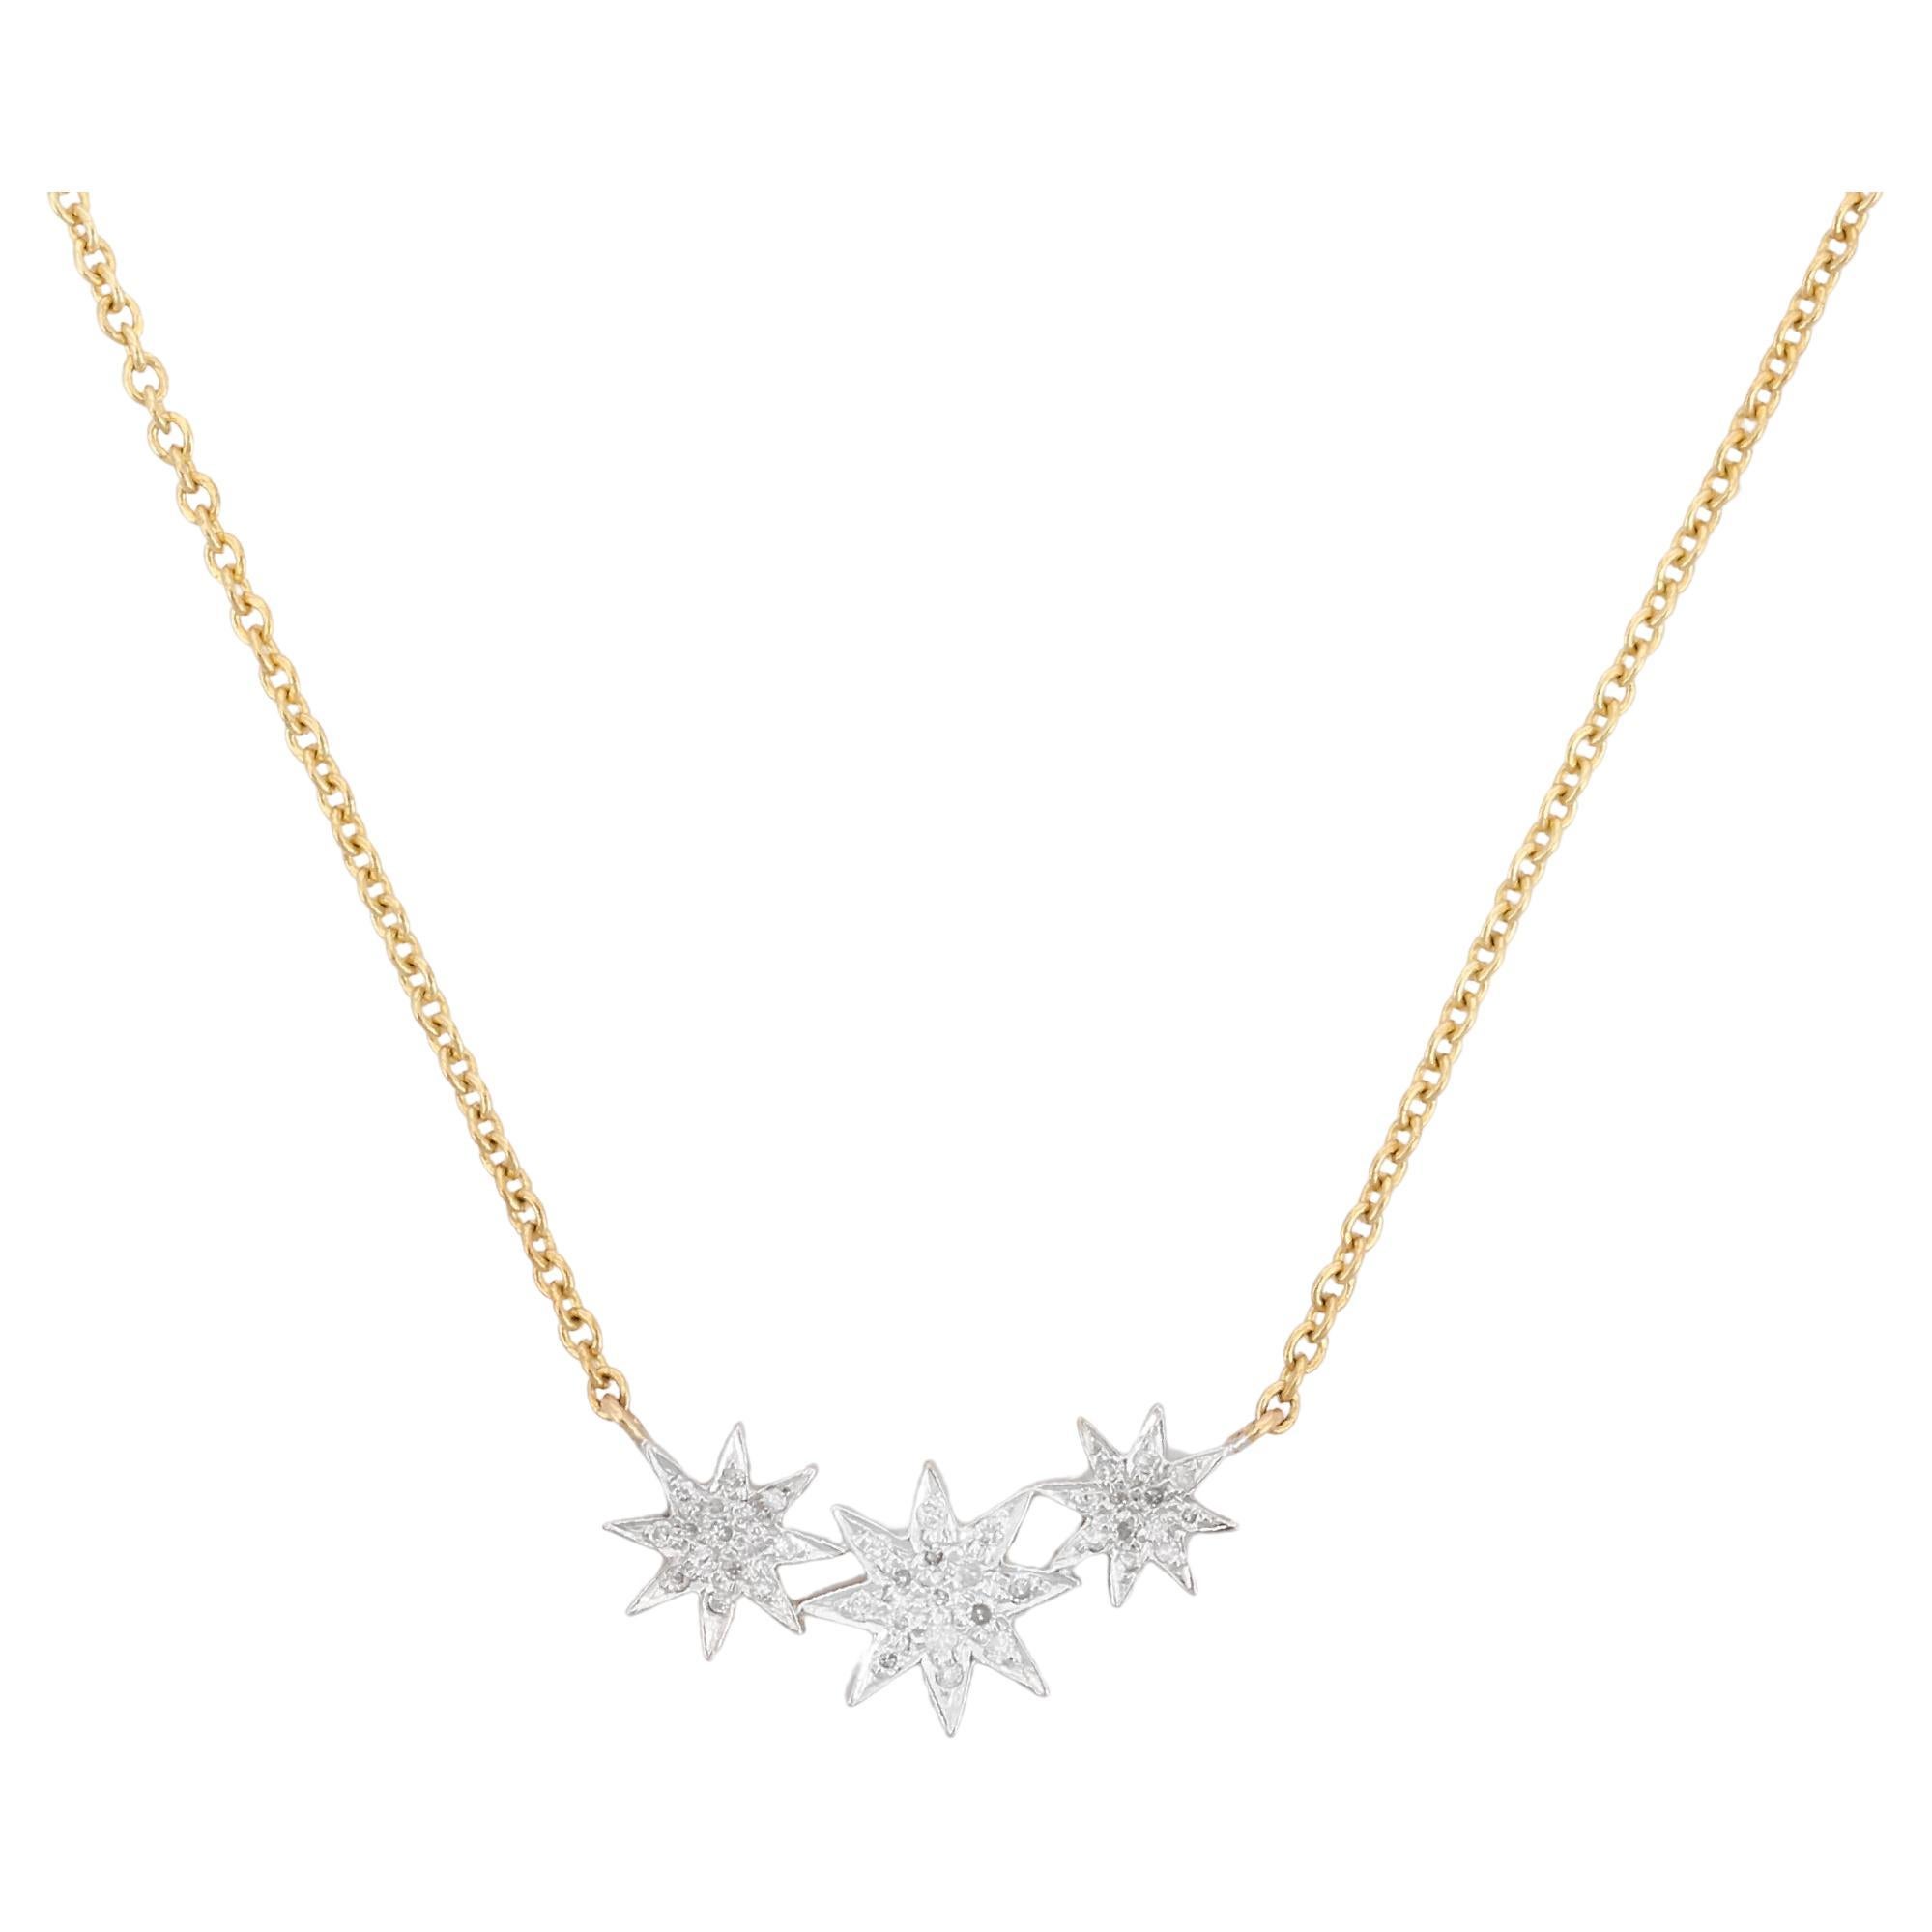 3 Star Diamond Necklace in 18K Yellow Gold